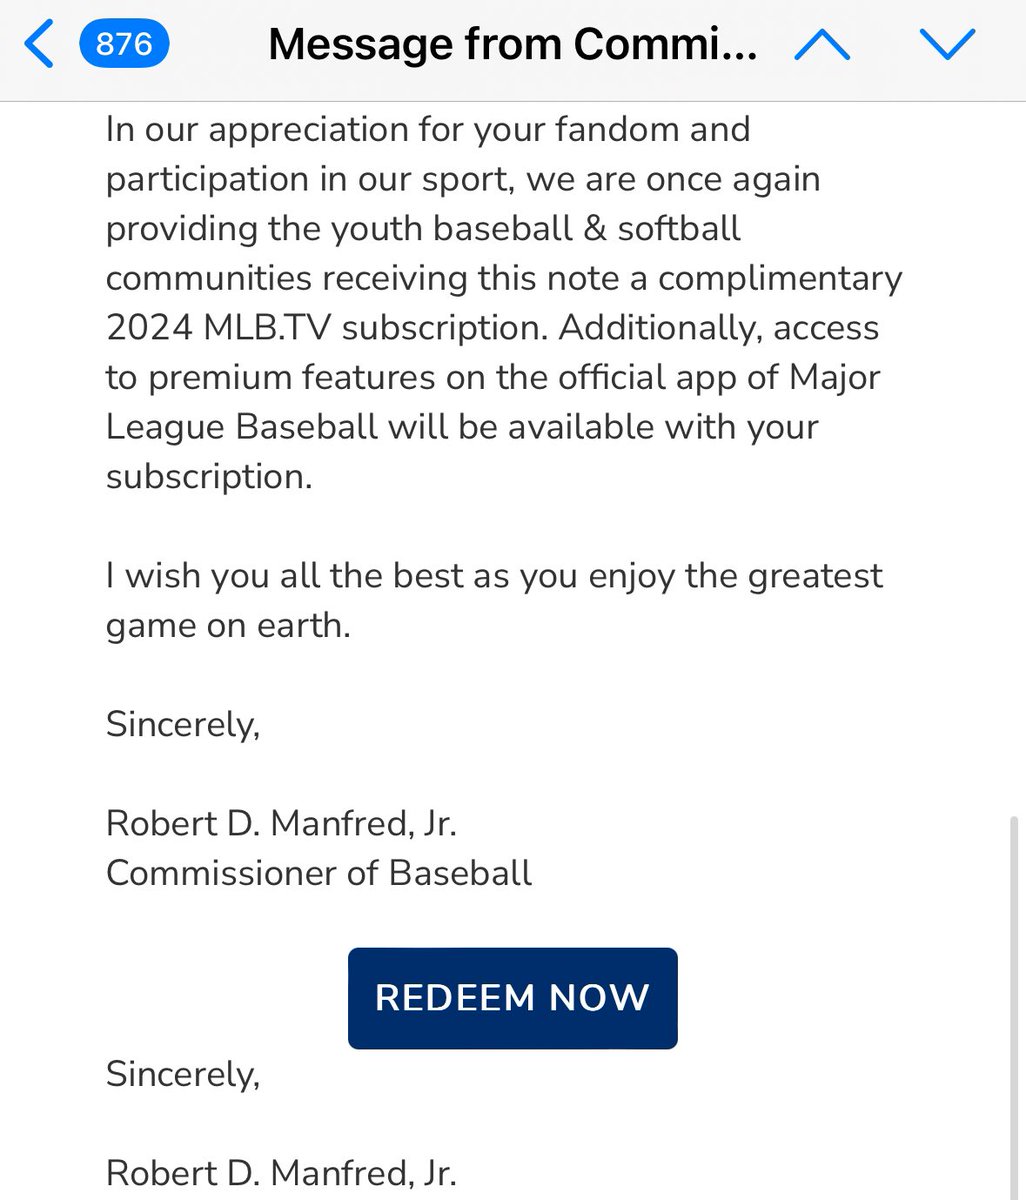 Shoutout to Bobby Manatee for the free MLB TV subscription.